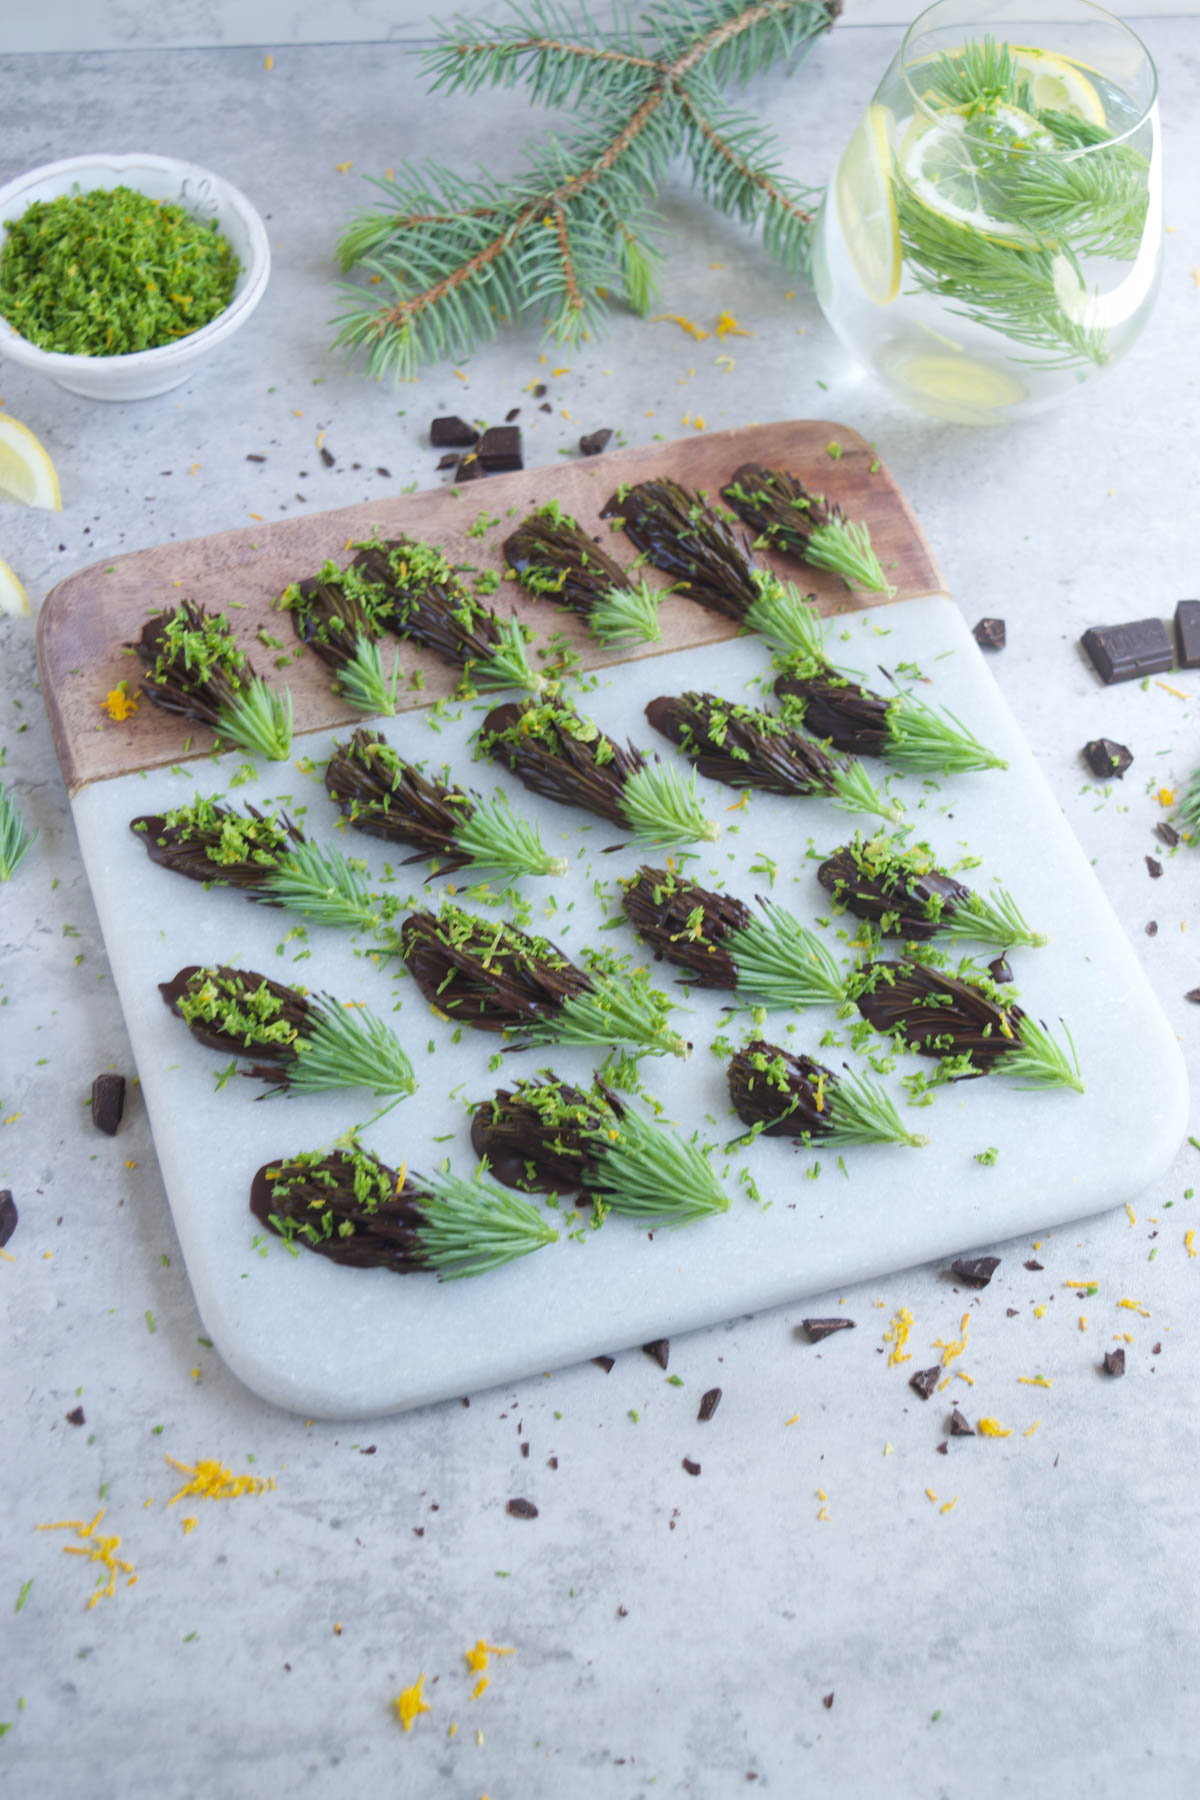 How To Make Chocolate-Covered Spruce Tips